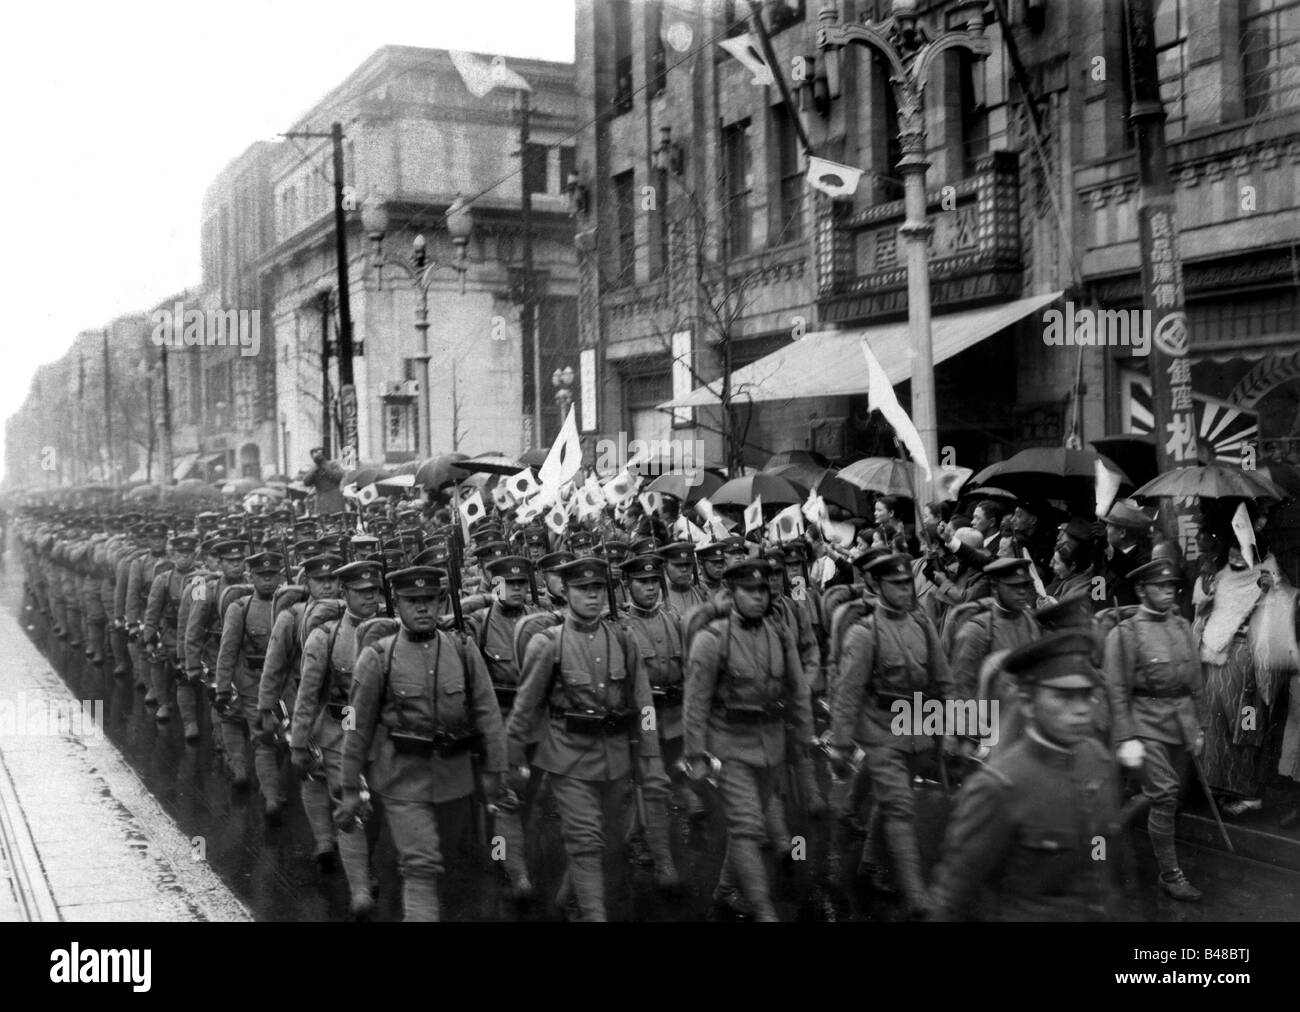 geograhy / travel, Japan, military, parade, day of army, 10.3.1938, cadetts of Toyama military academy, marching through Ginza, Tokyo, memorial of Mukden battle 1905, soldiers, infantry, Asia, historic, historical, 20th century, 1930s, celebration, people, Stock Photo